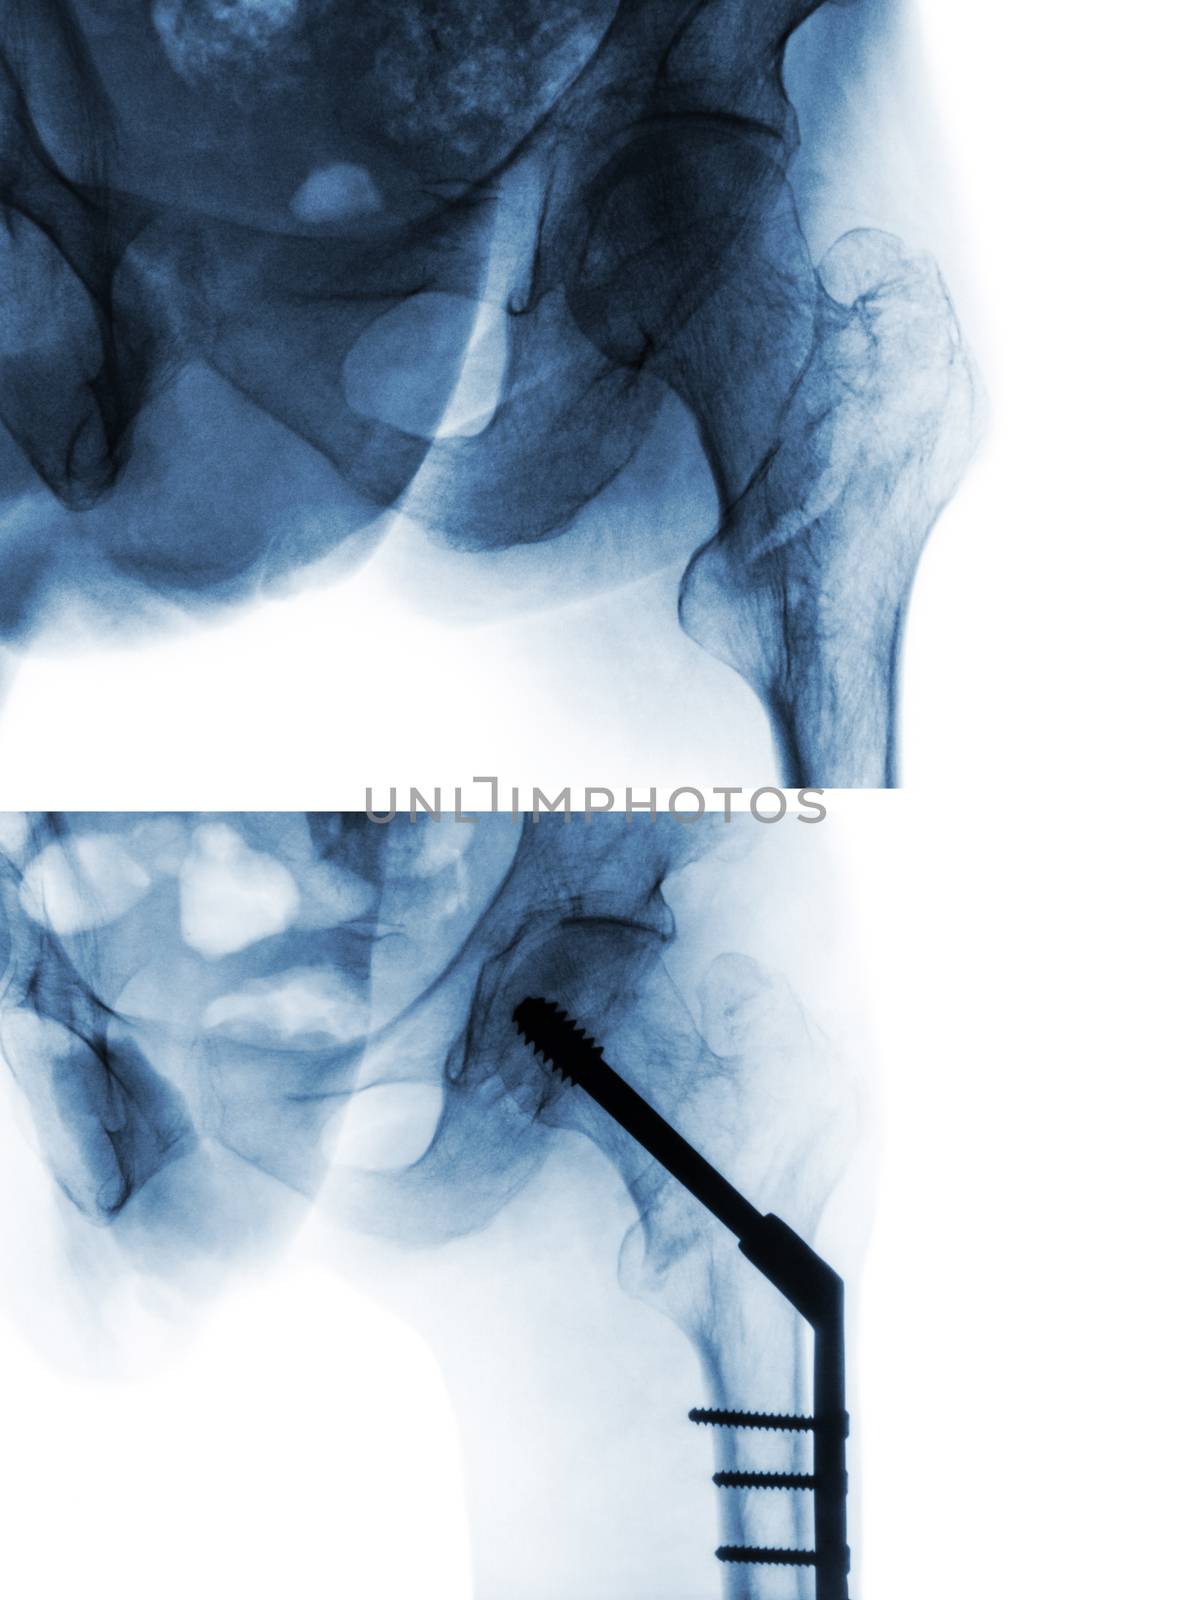 Intertrochanteric fracture femur ( thigh bone ). X-ray of hip and comparison between before surgery (upper image) and after surgery (lower image). Patient was operated and insert intramedullary nail by stockdevil